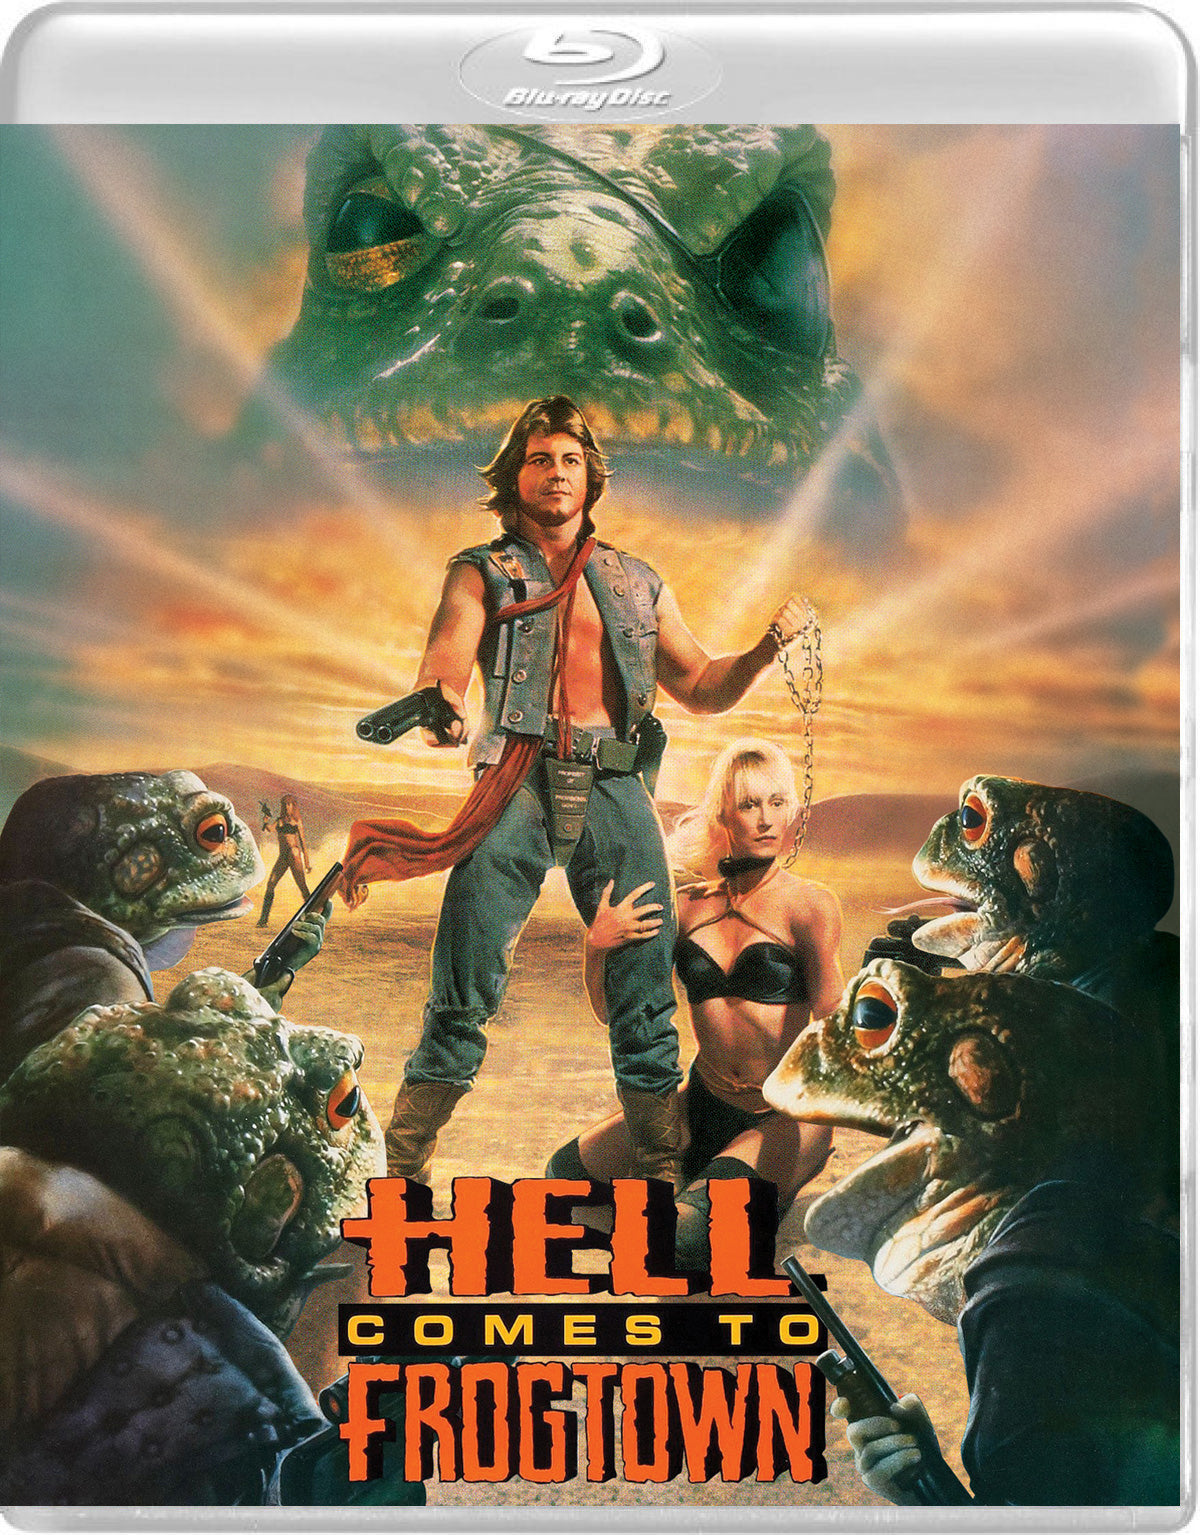 Hell Comes to Frogtown [Blu-ray] cover art